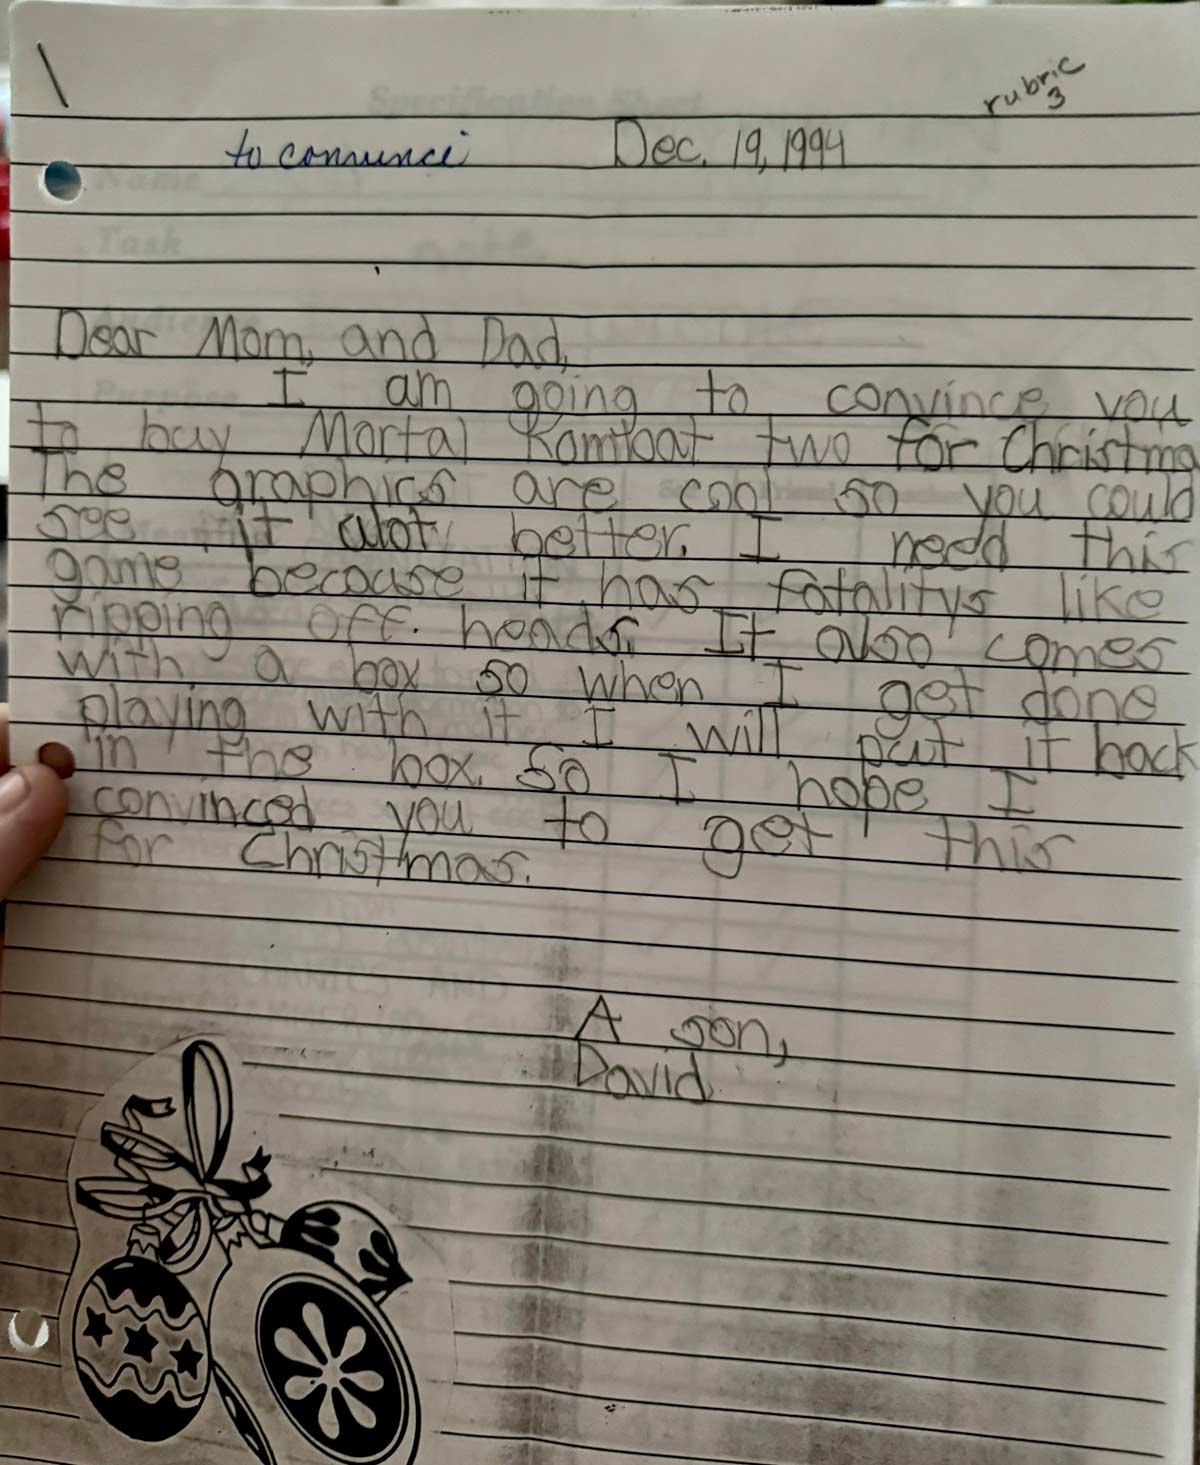 A letter I wrote my parents in the Fourth Grade